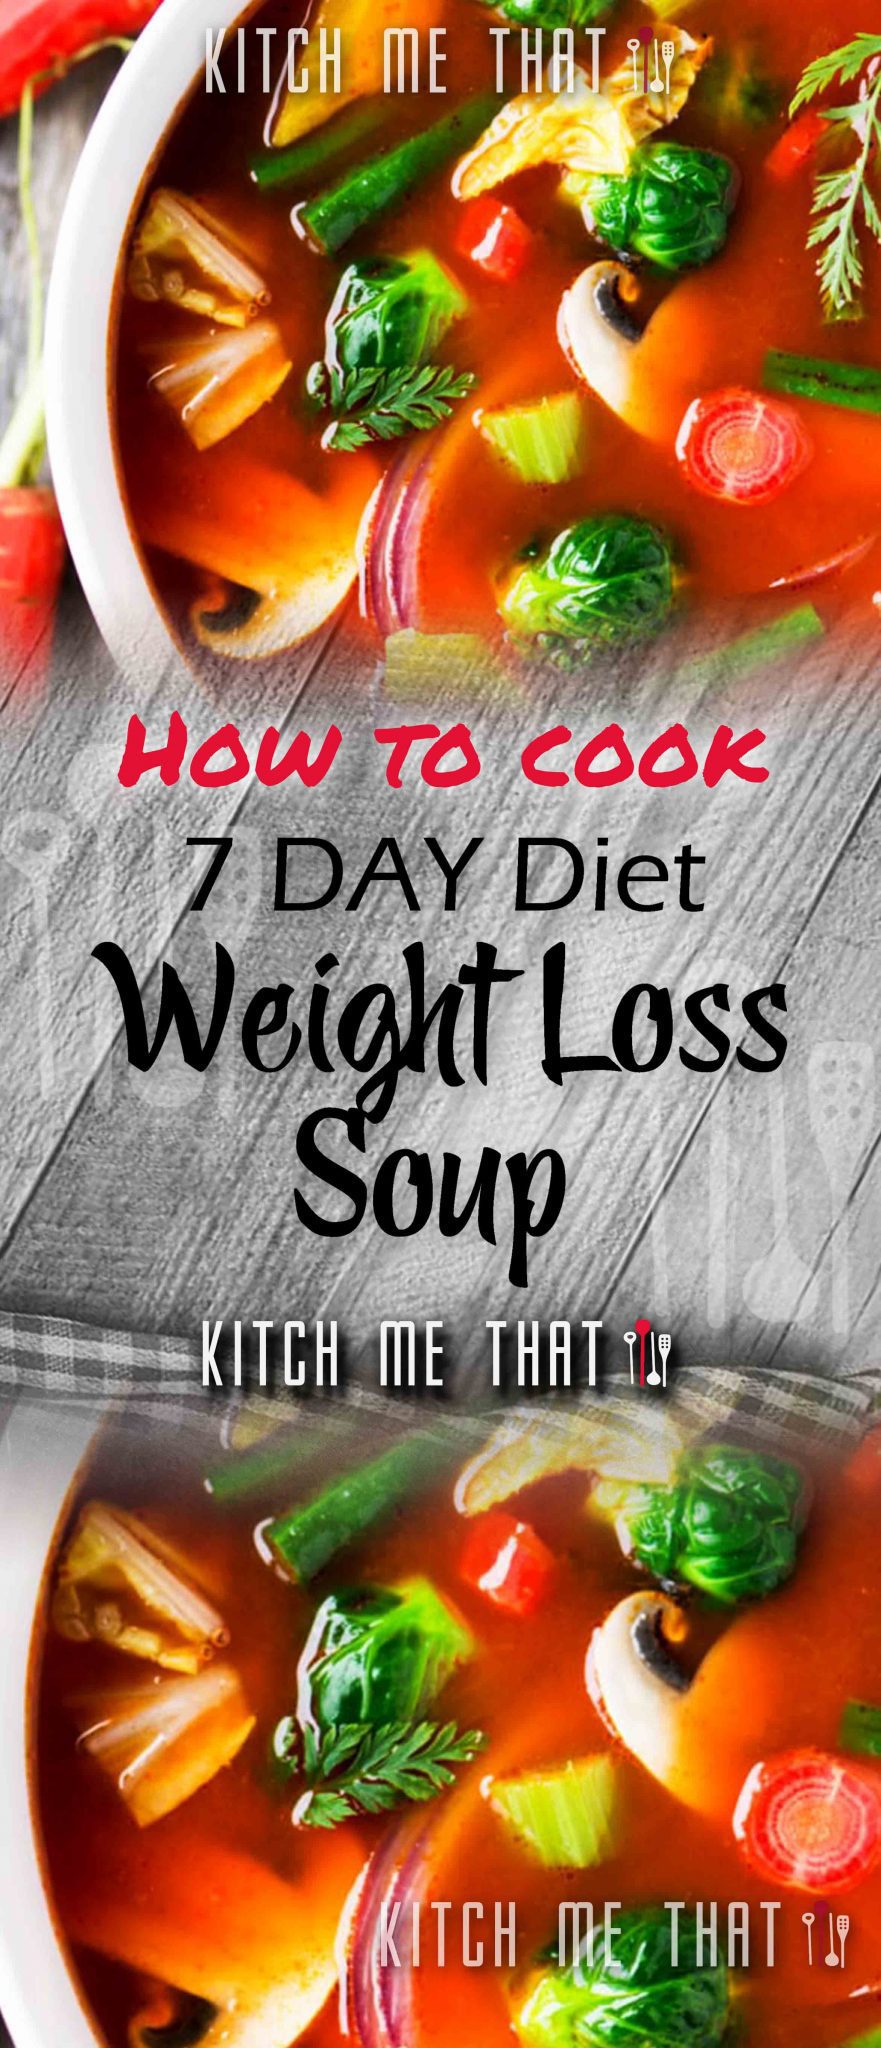 7-Day Diet Weight Loss Soup (Wonder Soup) | Kitch Me That 2020